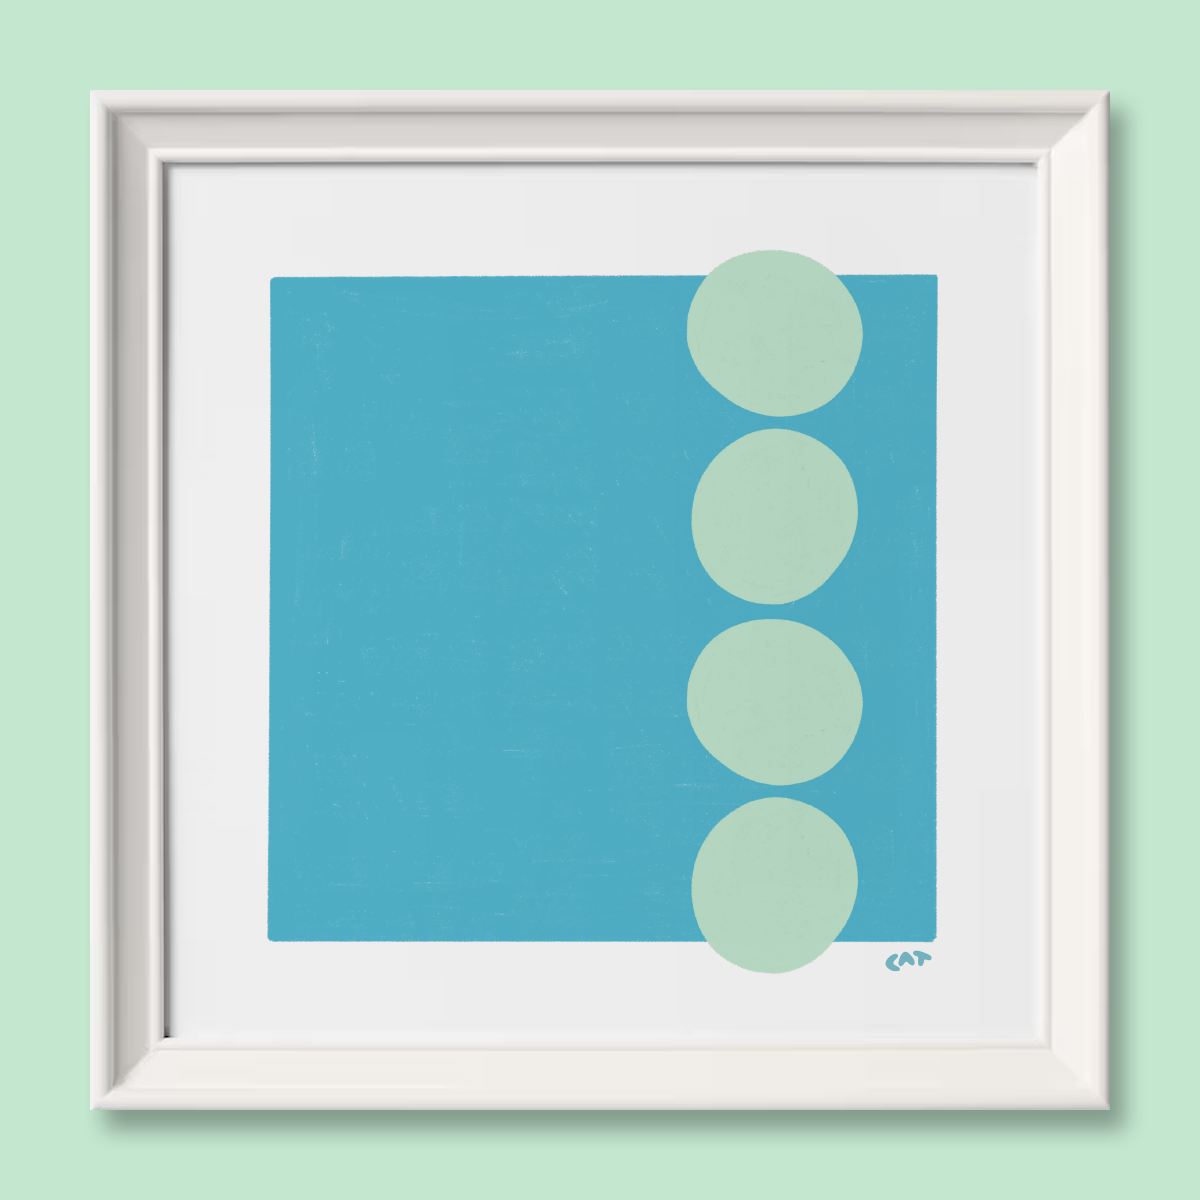 White framed print of a medium blue square with four light blue circles lined up vertically on the right side of the medium blue square.